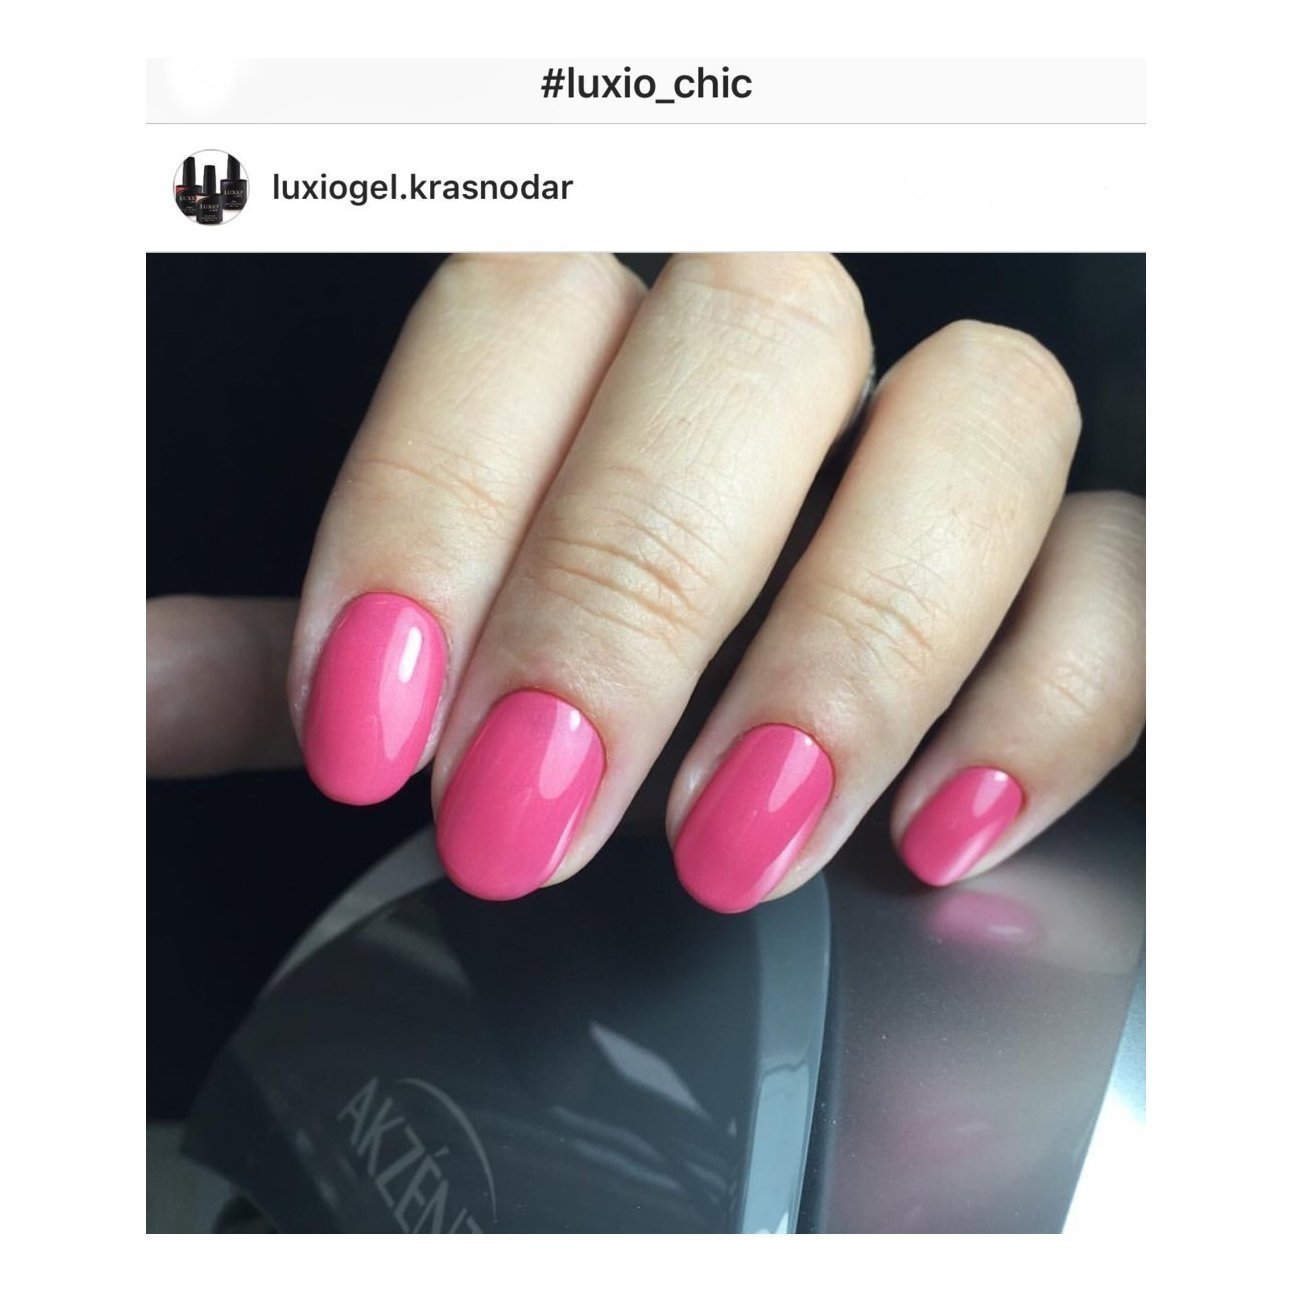 1073 Nail Salon Name Ideas for a Chic and Glamorous Start - Soocial